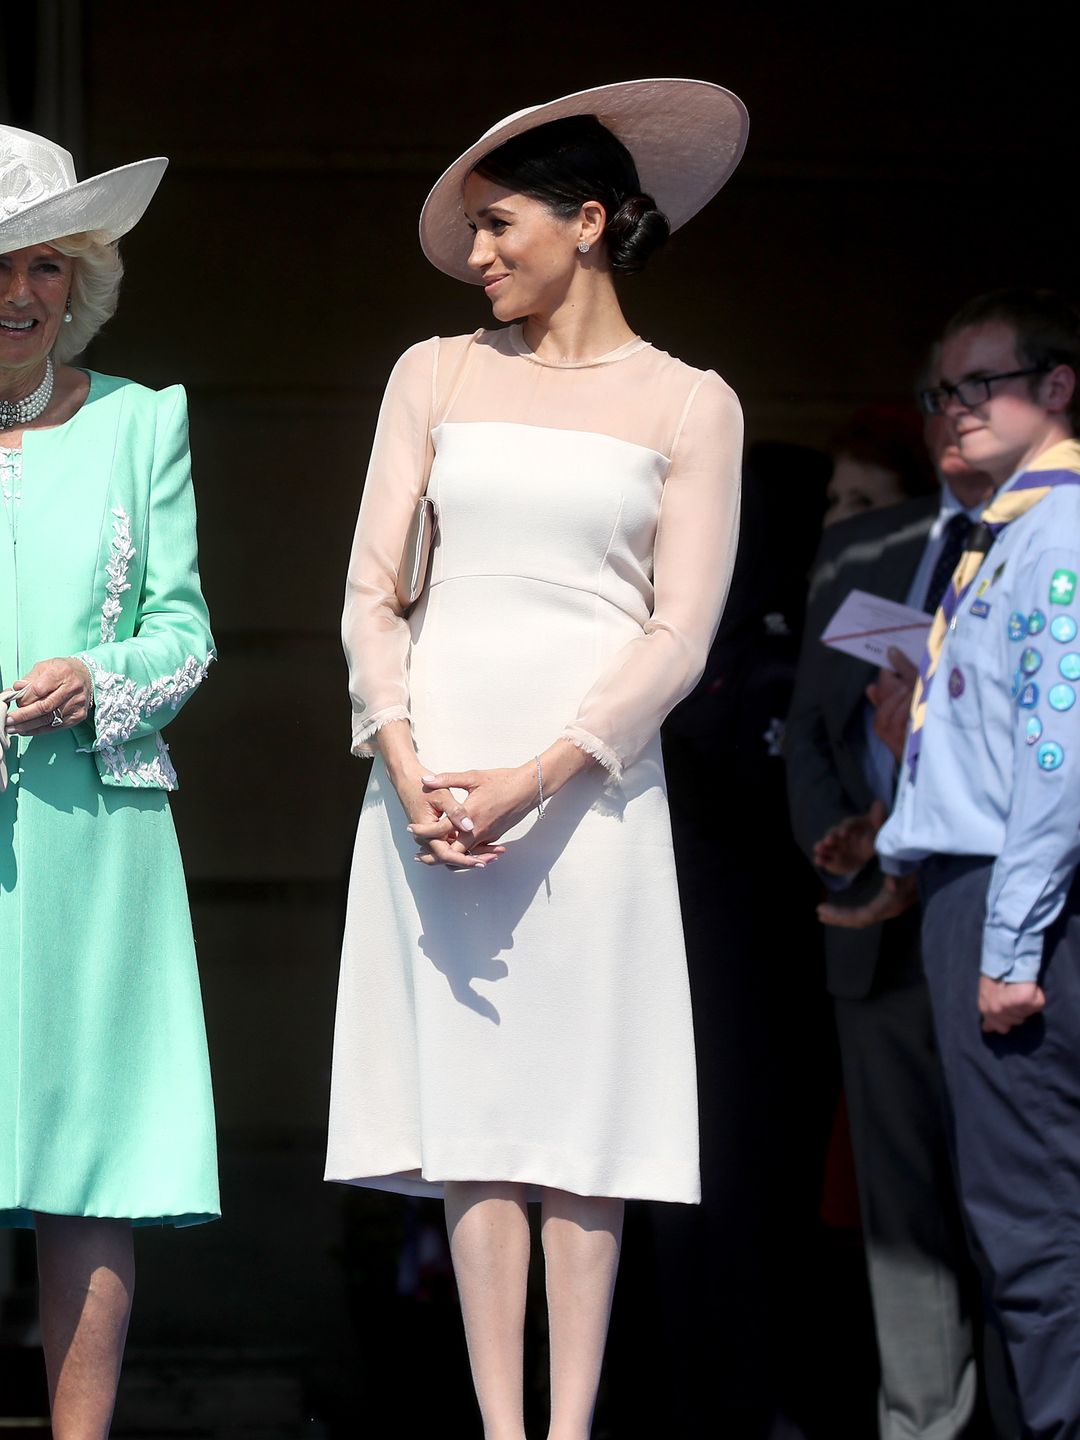 Queen Camilla standing with Meghan Markle in tights